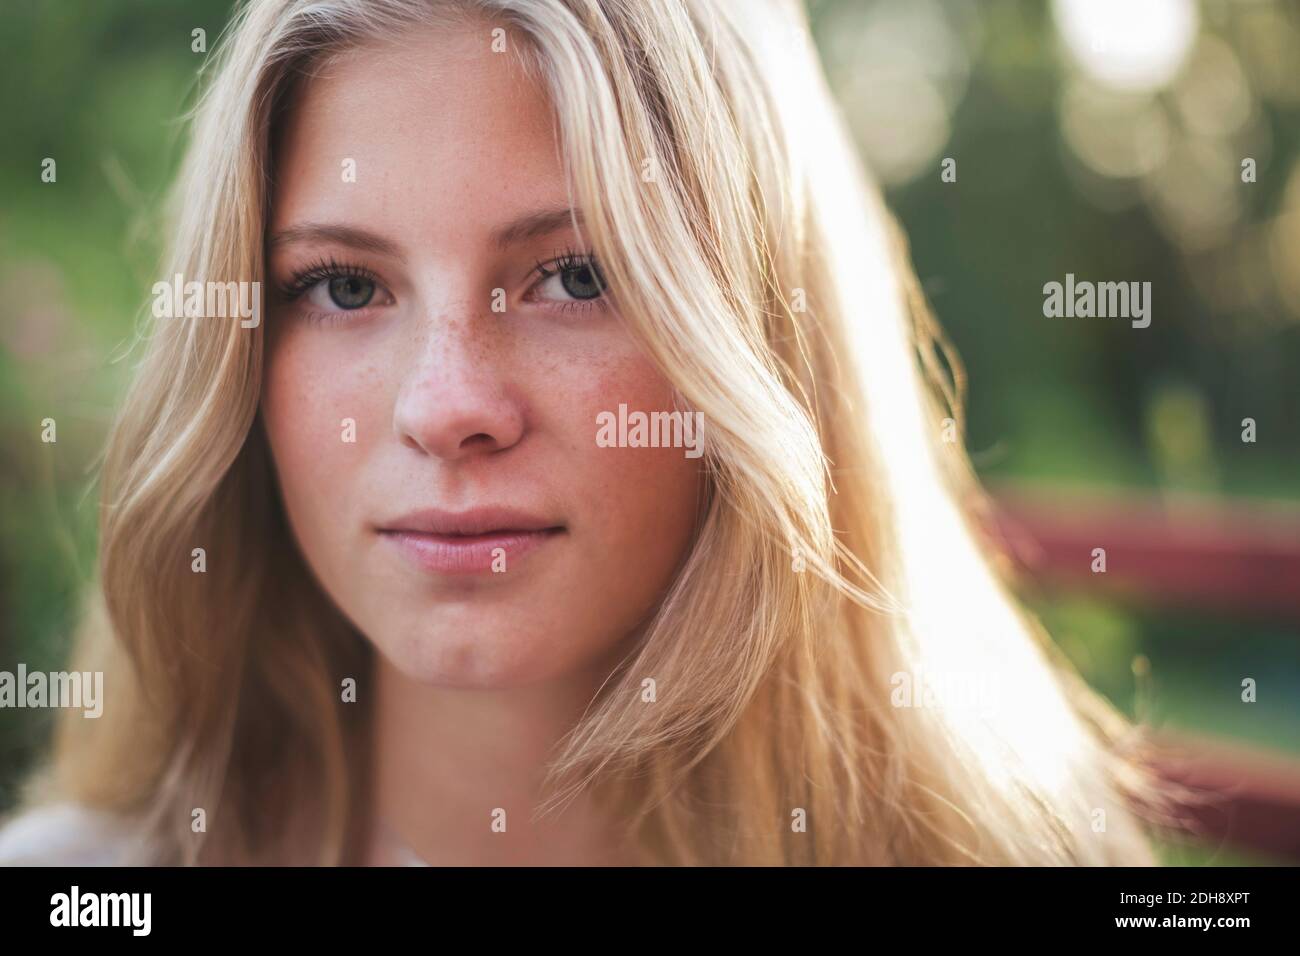 Close-up portrait of teenage girl in back yard Stock Photo